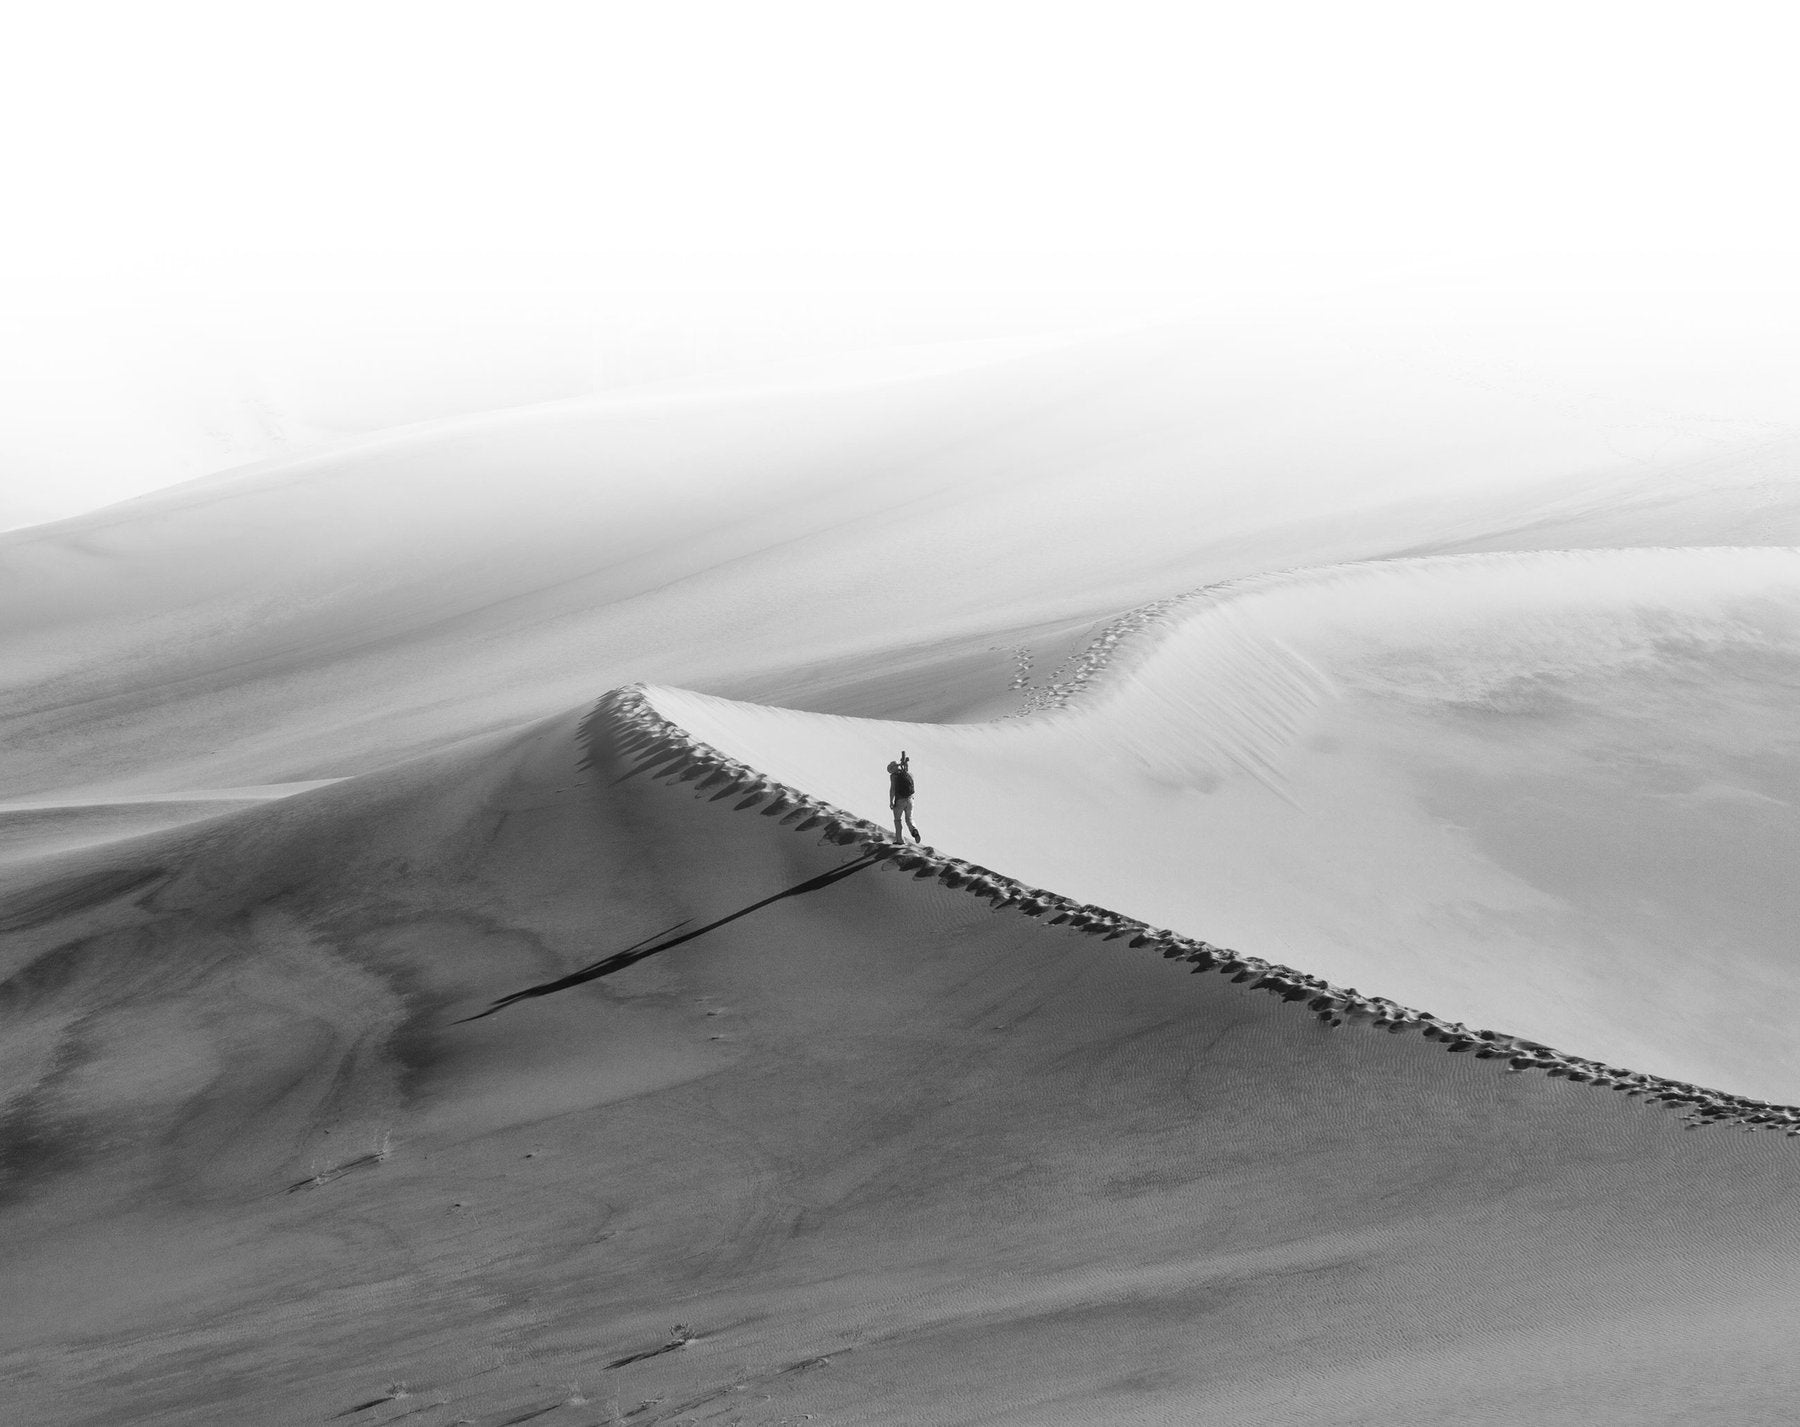 Peter Lik walking across the Mesquite Flat Sand Dunes in Death Valley National Park in California. 